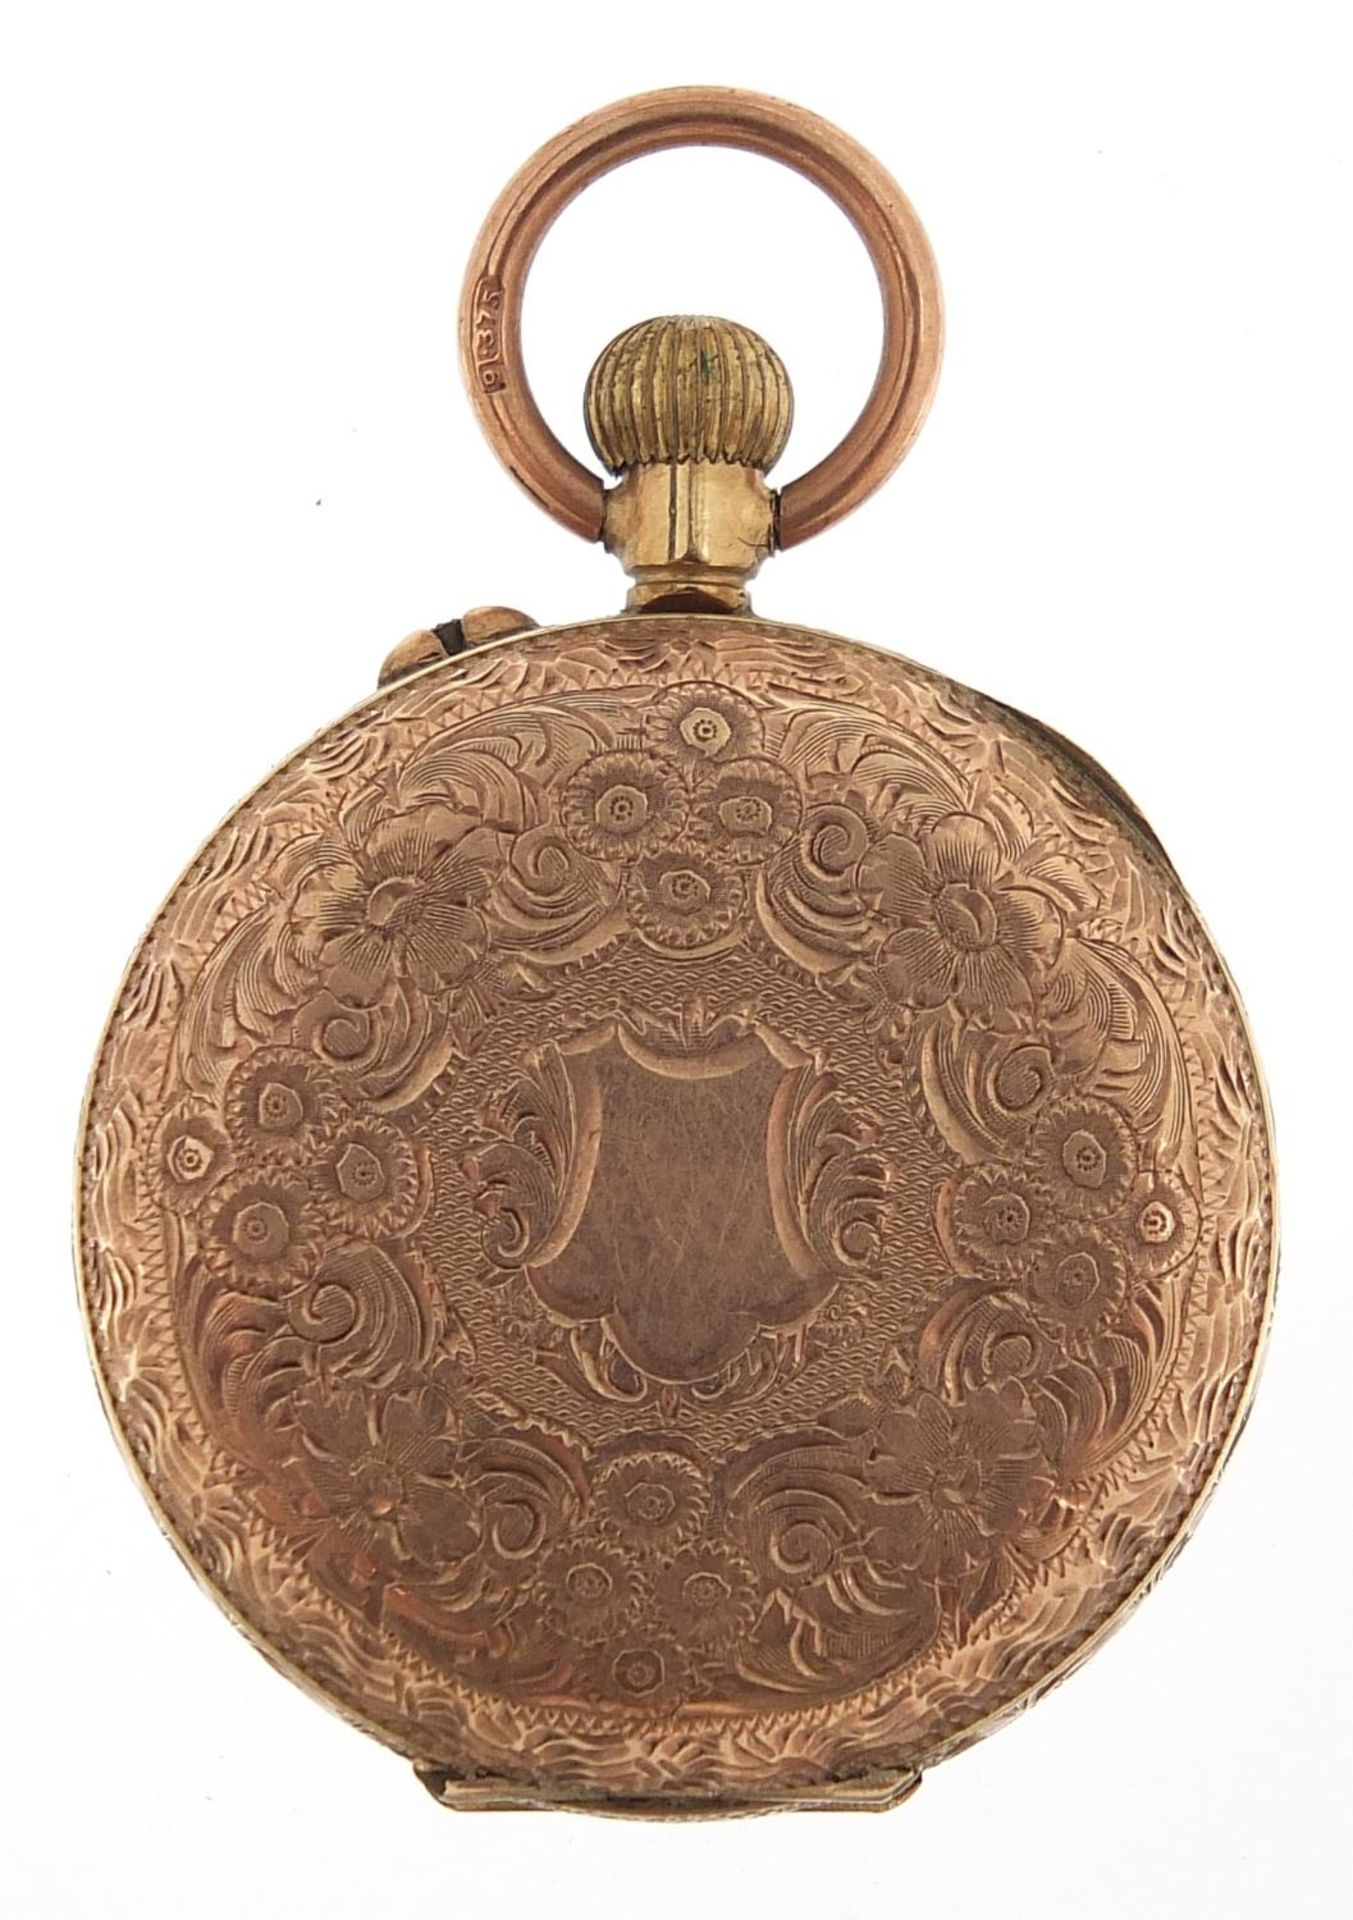 Ladies 9ct rose gold pocket watch with ornate dial, 32mm in diameter, 22.5g - Image 2 of 5